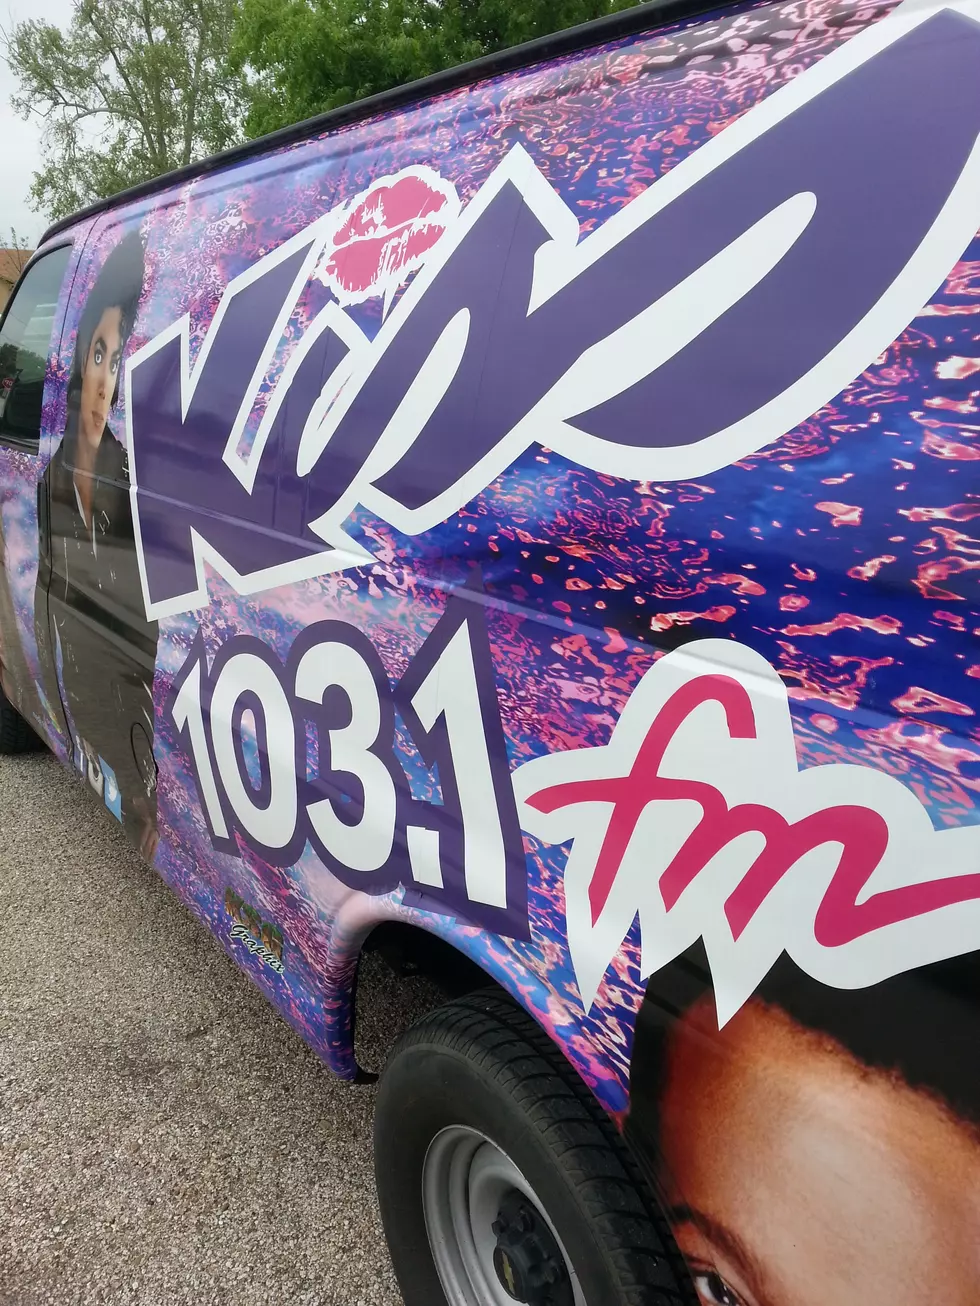 Kiss-FM Live In Killeen At Dodge Country Used Cars